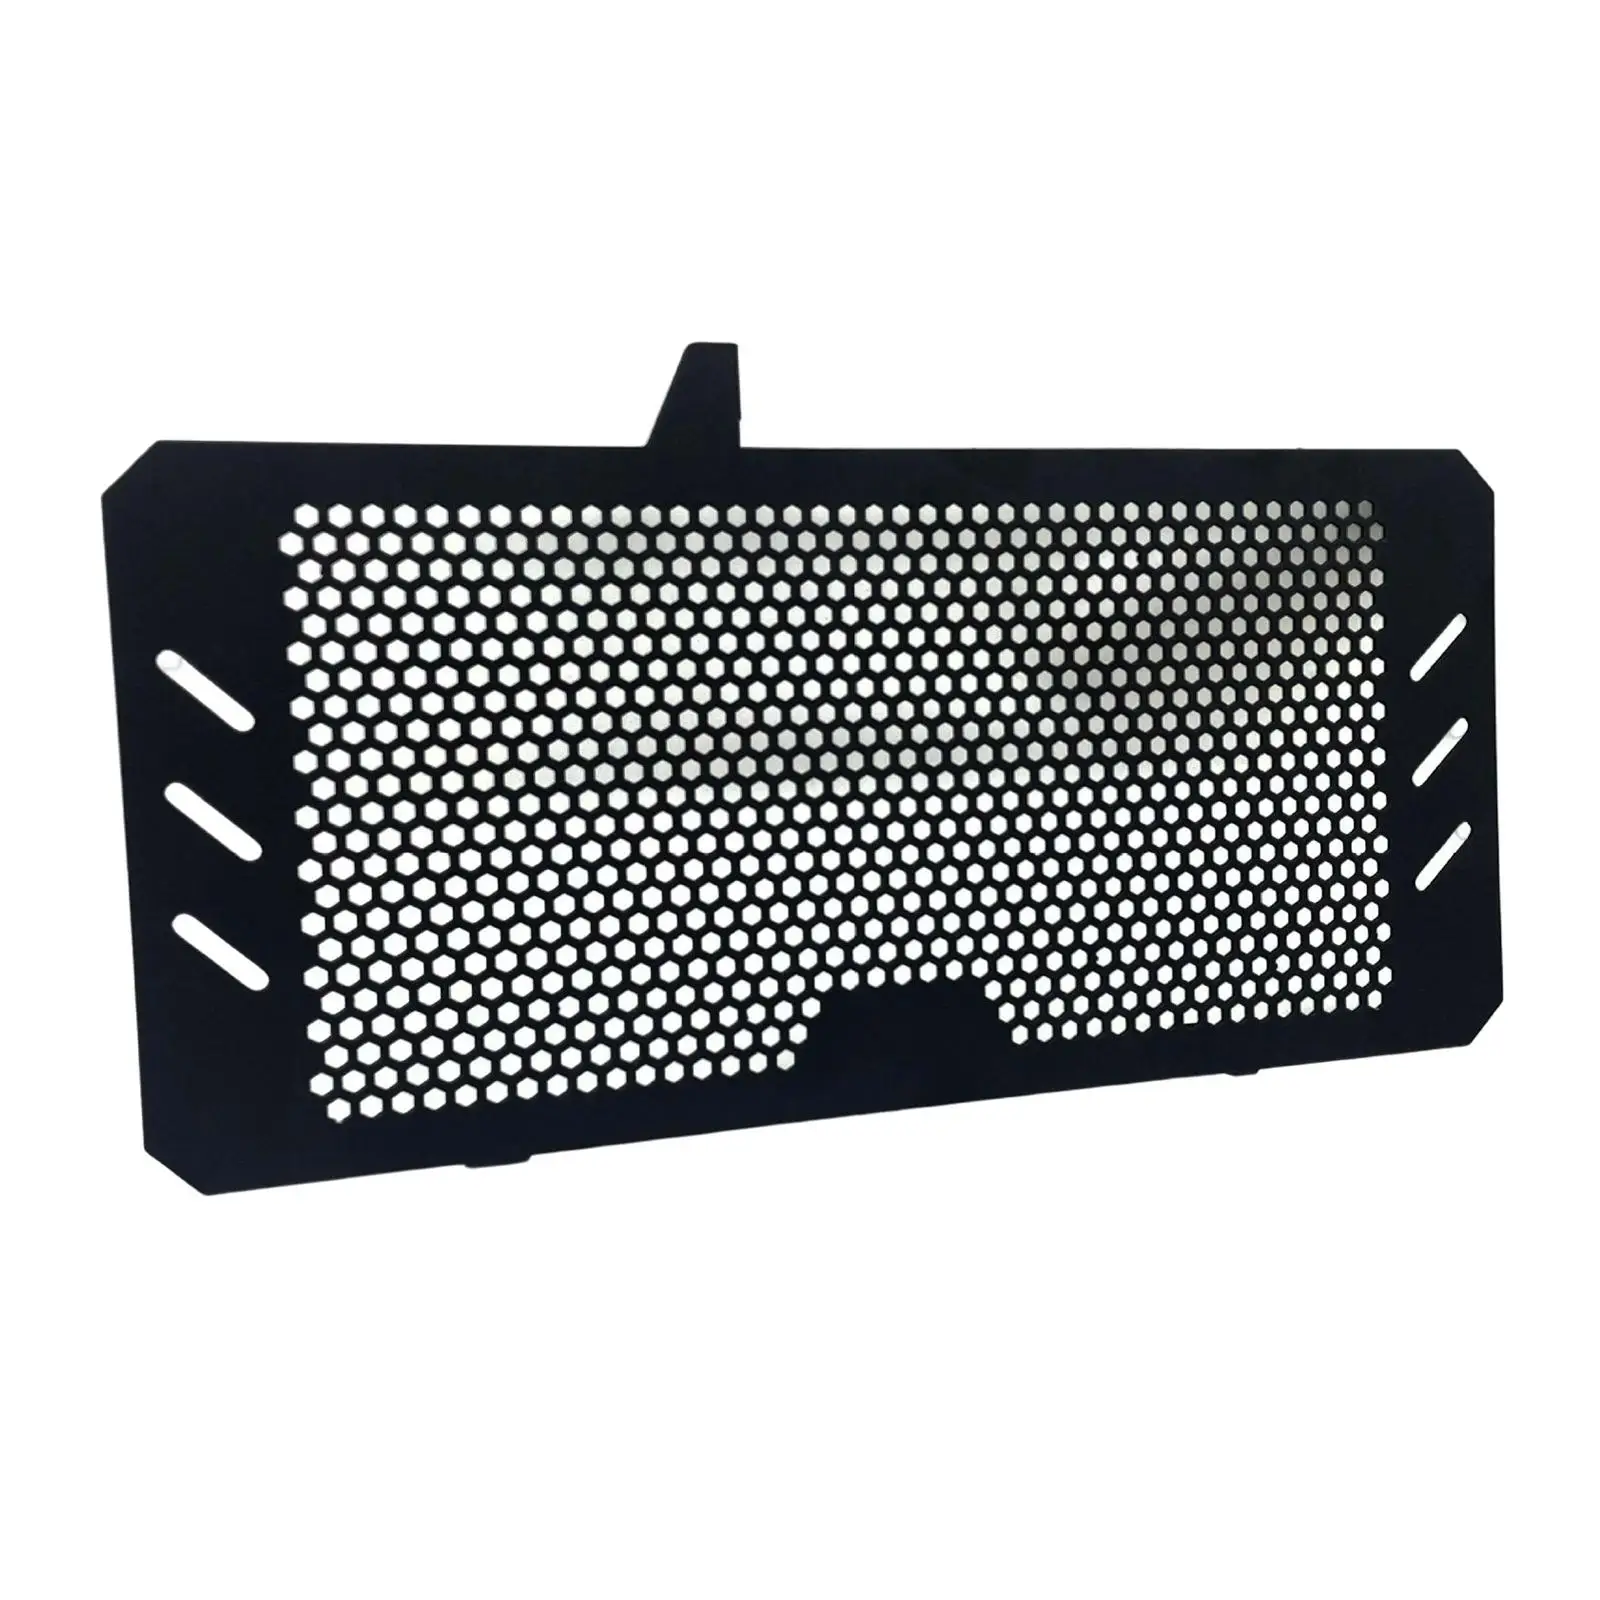 Motorcycle Radiator Grille Guard for Honda NC750 S / x Replacement Aluminum Alloy